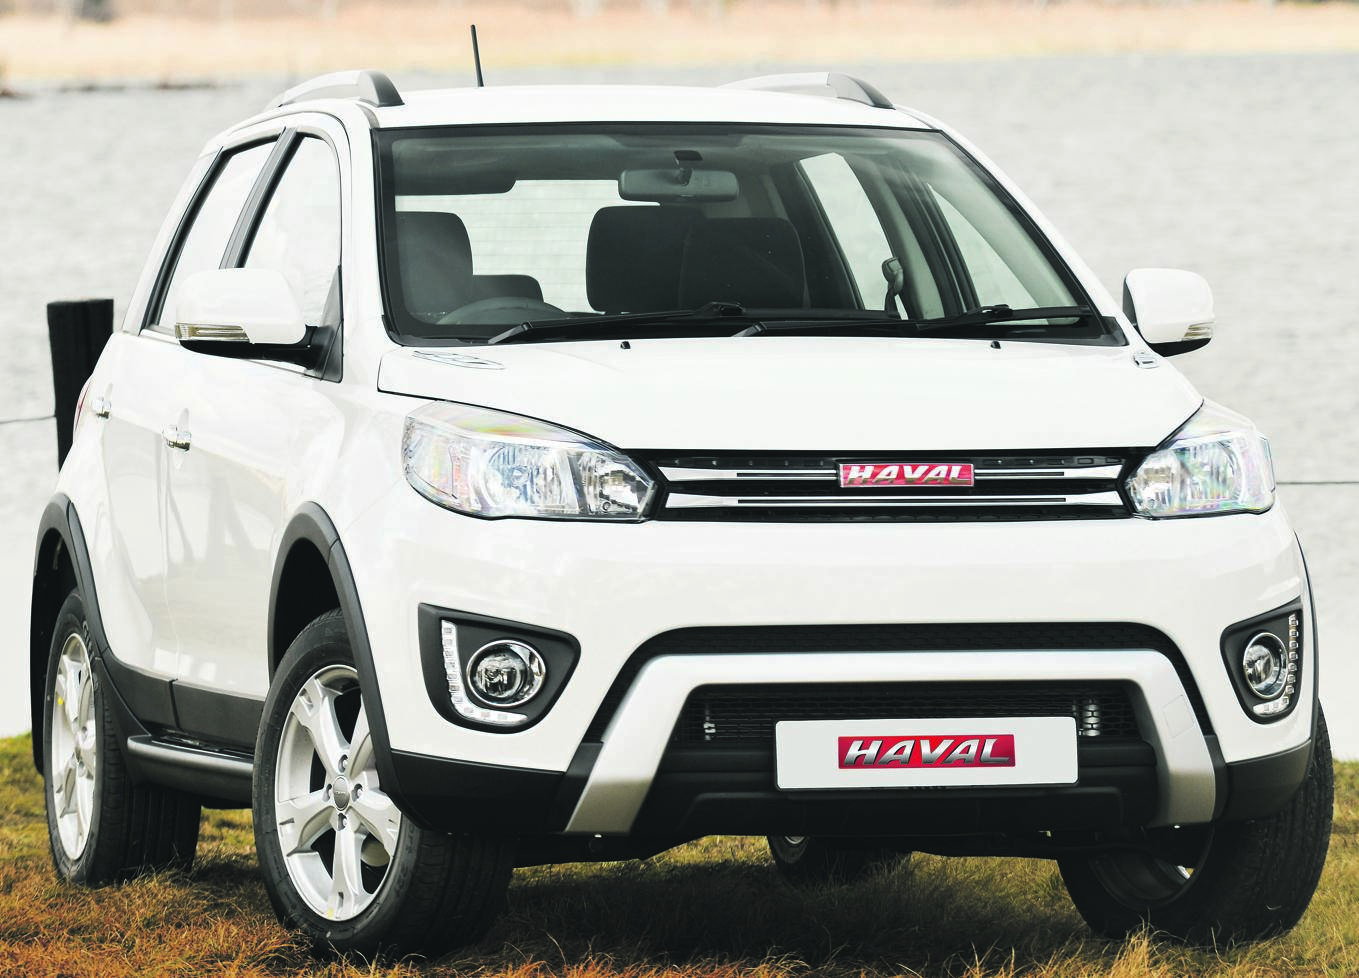 The Haval H1 is very affordable.